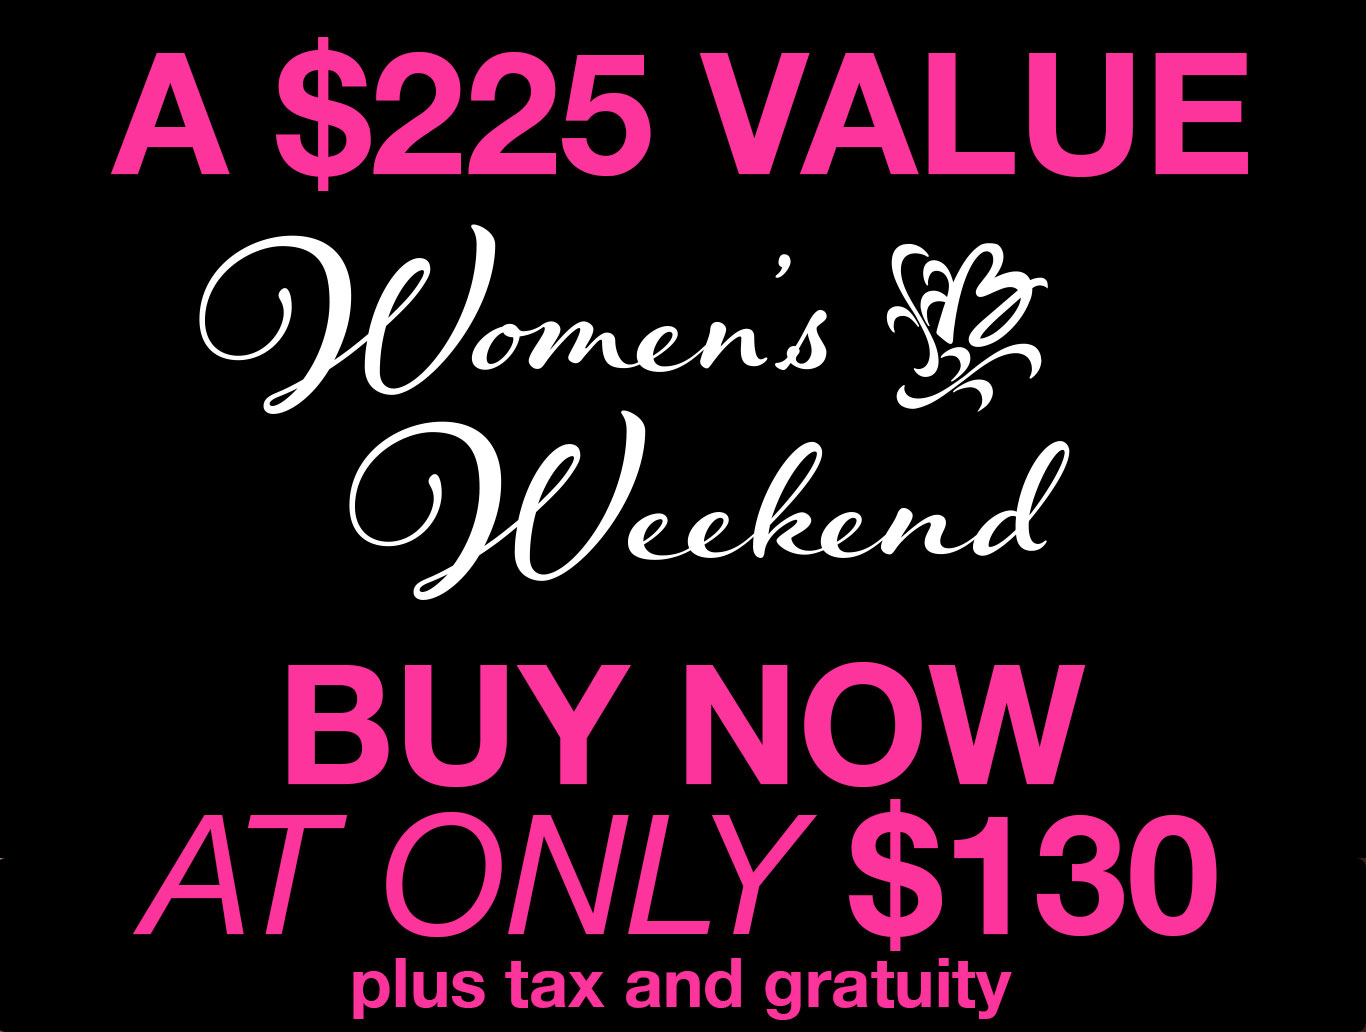 A $225 Value - Buy Now at only $130 plus tax and gratuity